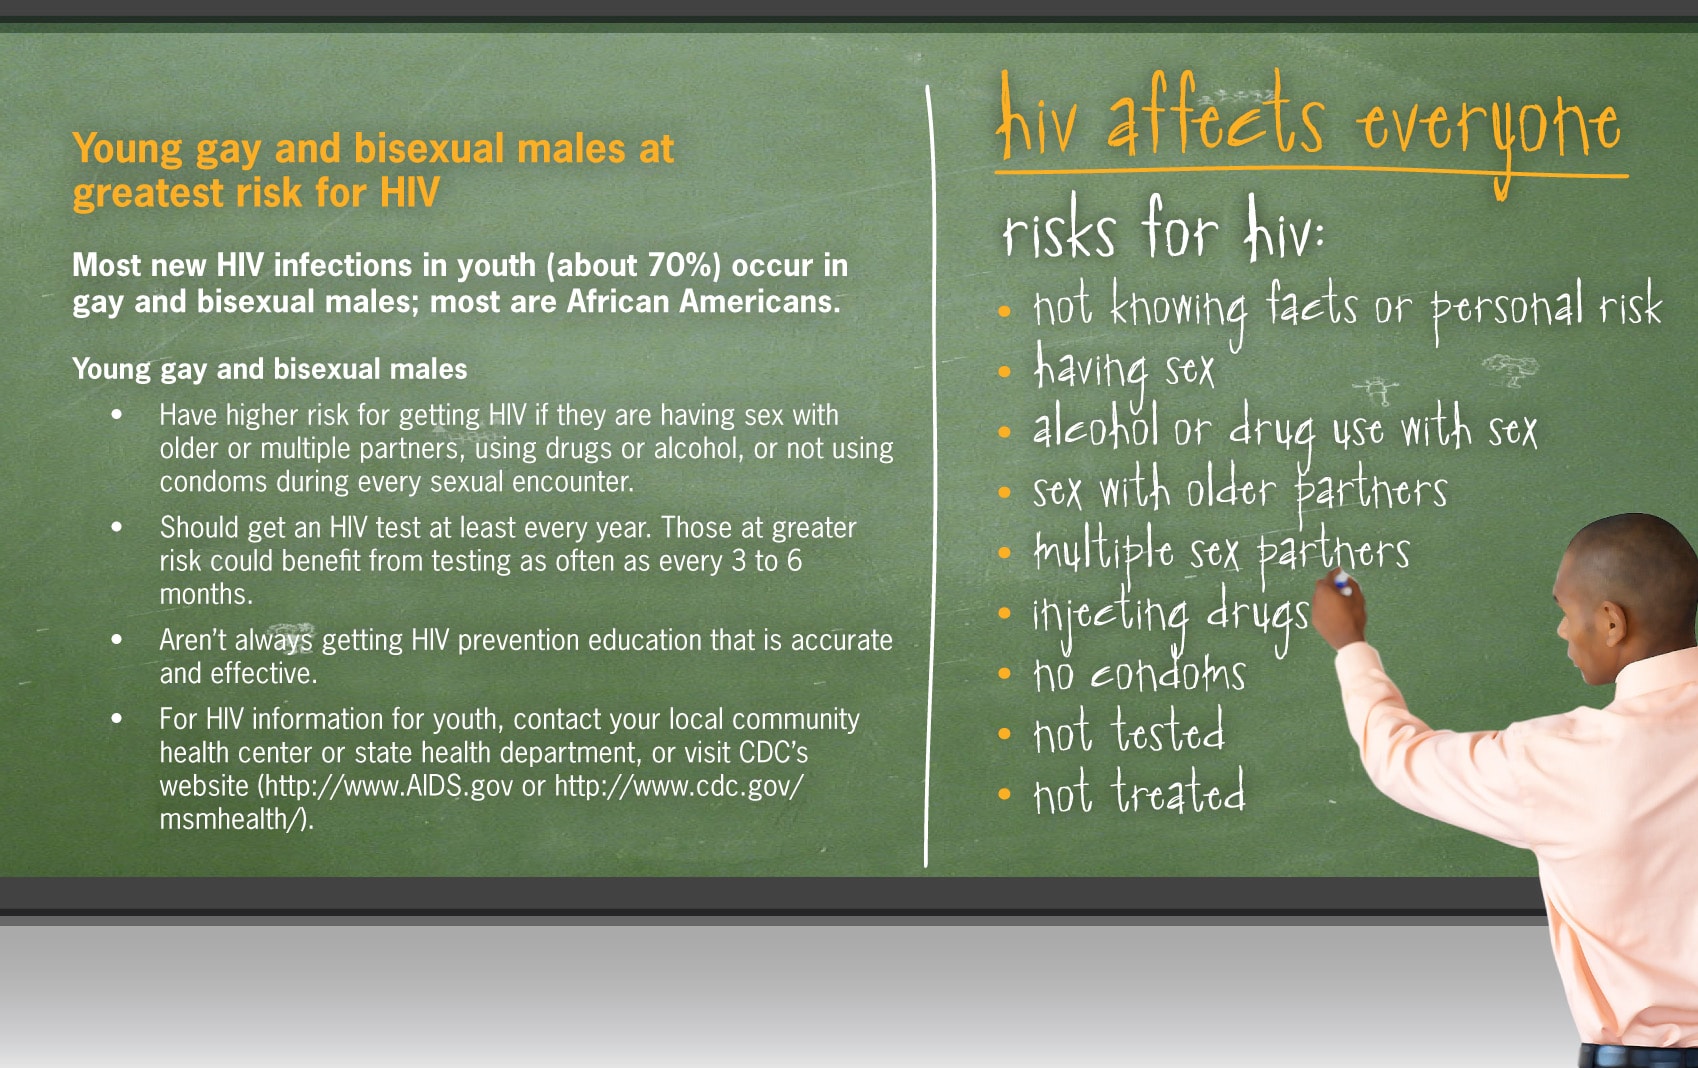 Young gay and bisexual males at gereatest risk for HIV